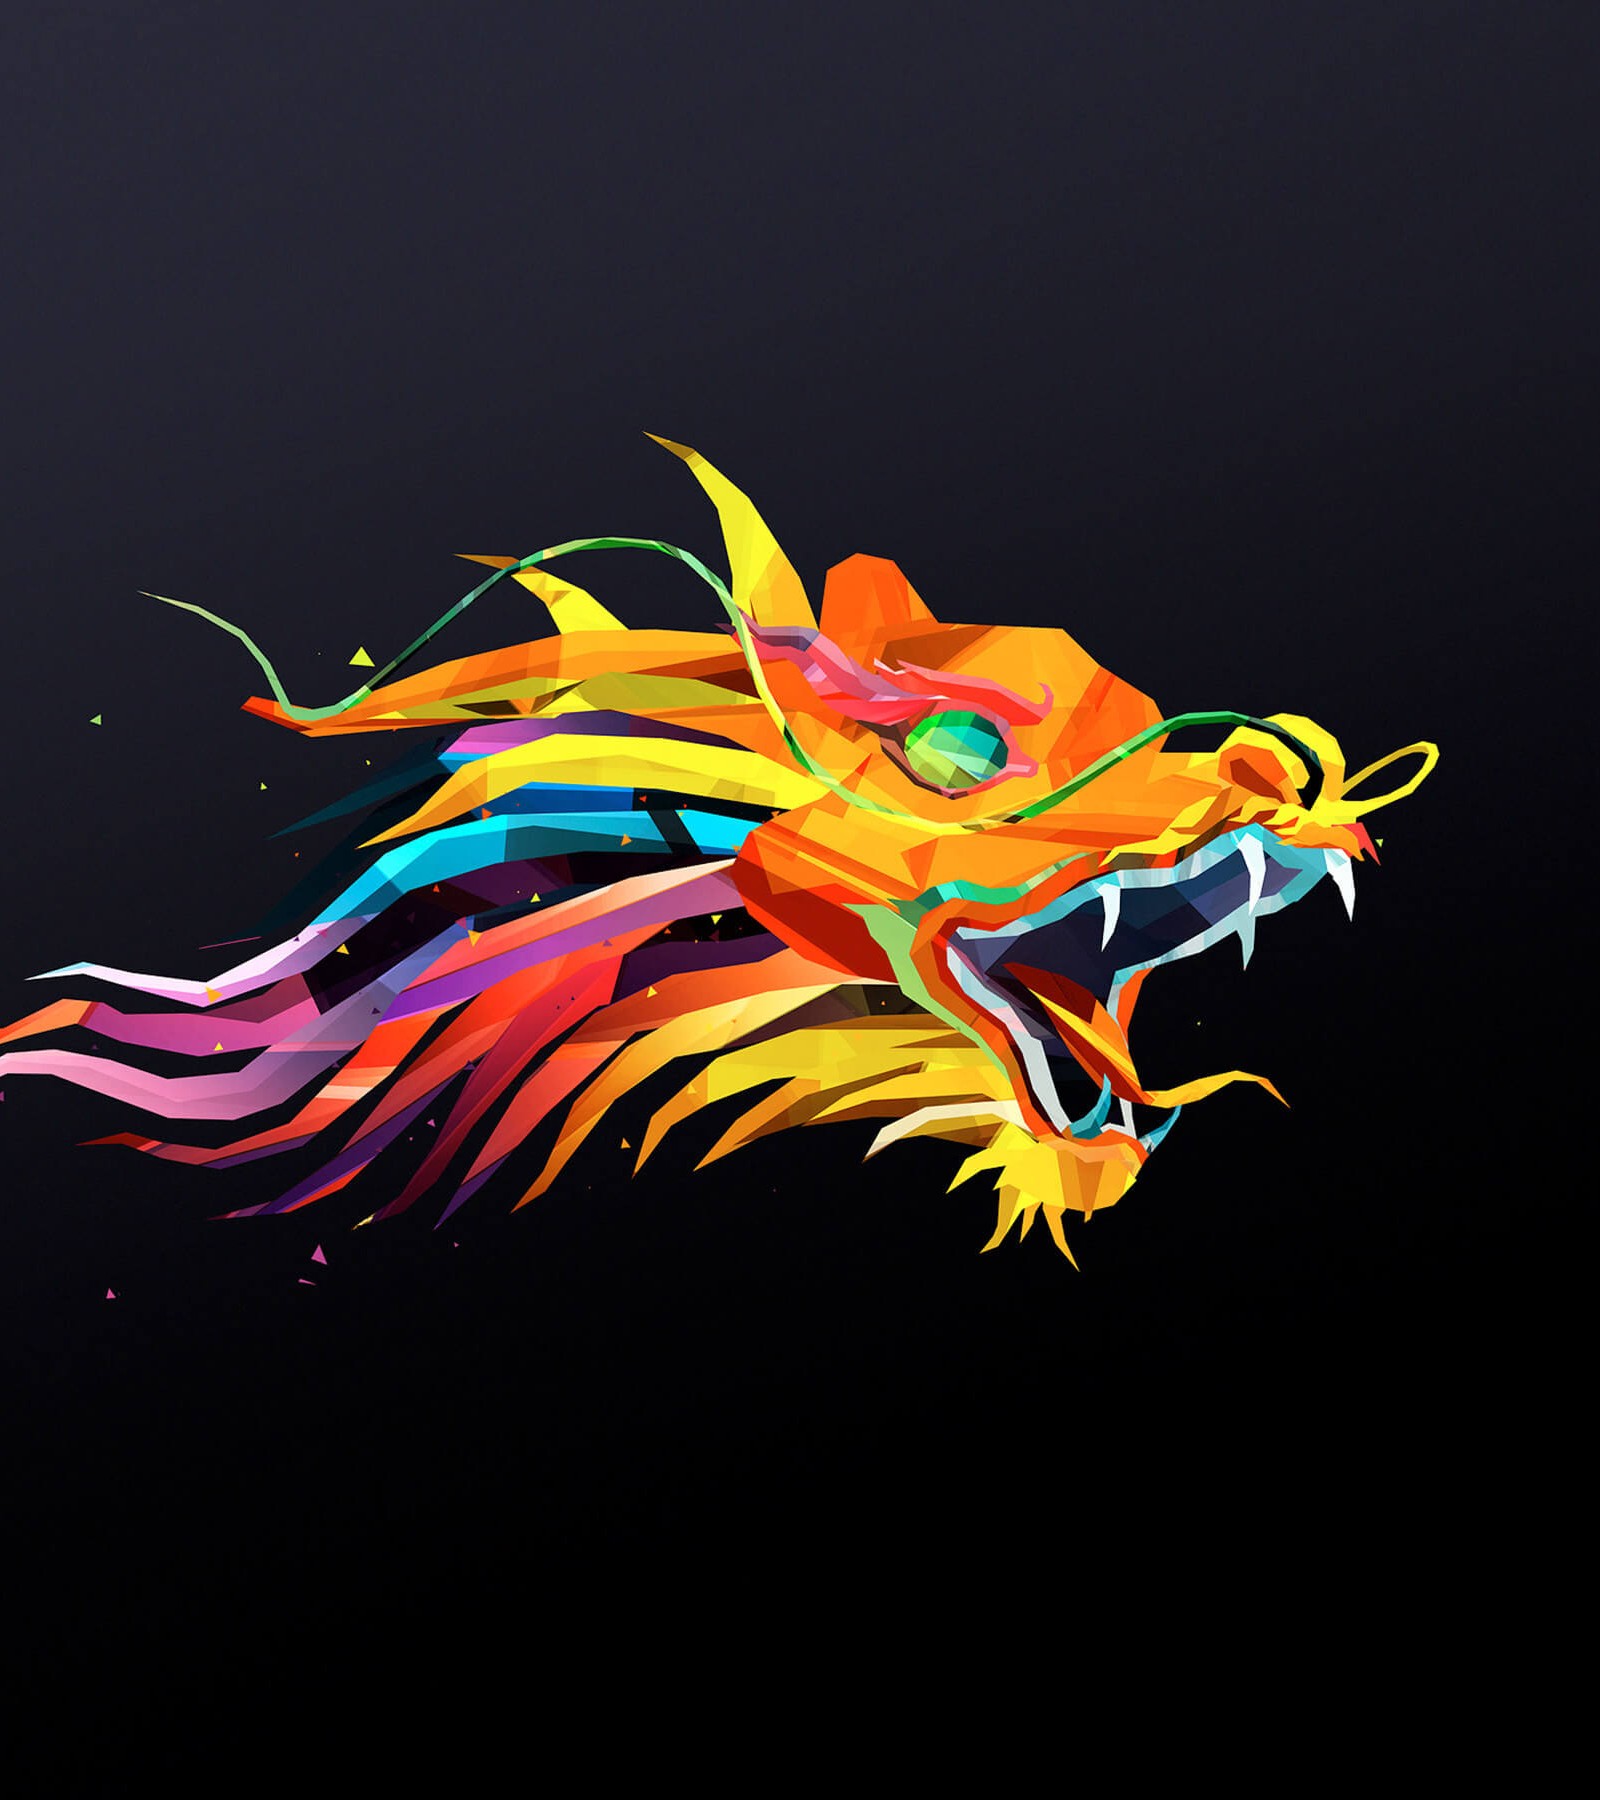 Free Download The Dragon Wallpaper For Amazon Kindle Fire Hdx 1600x1800 For Your Desktop Mobile Tablet Explore 48 Amazon Fire Hd 8 Wallpaper Set Kindle Fire Hd Wallpaper